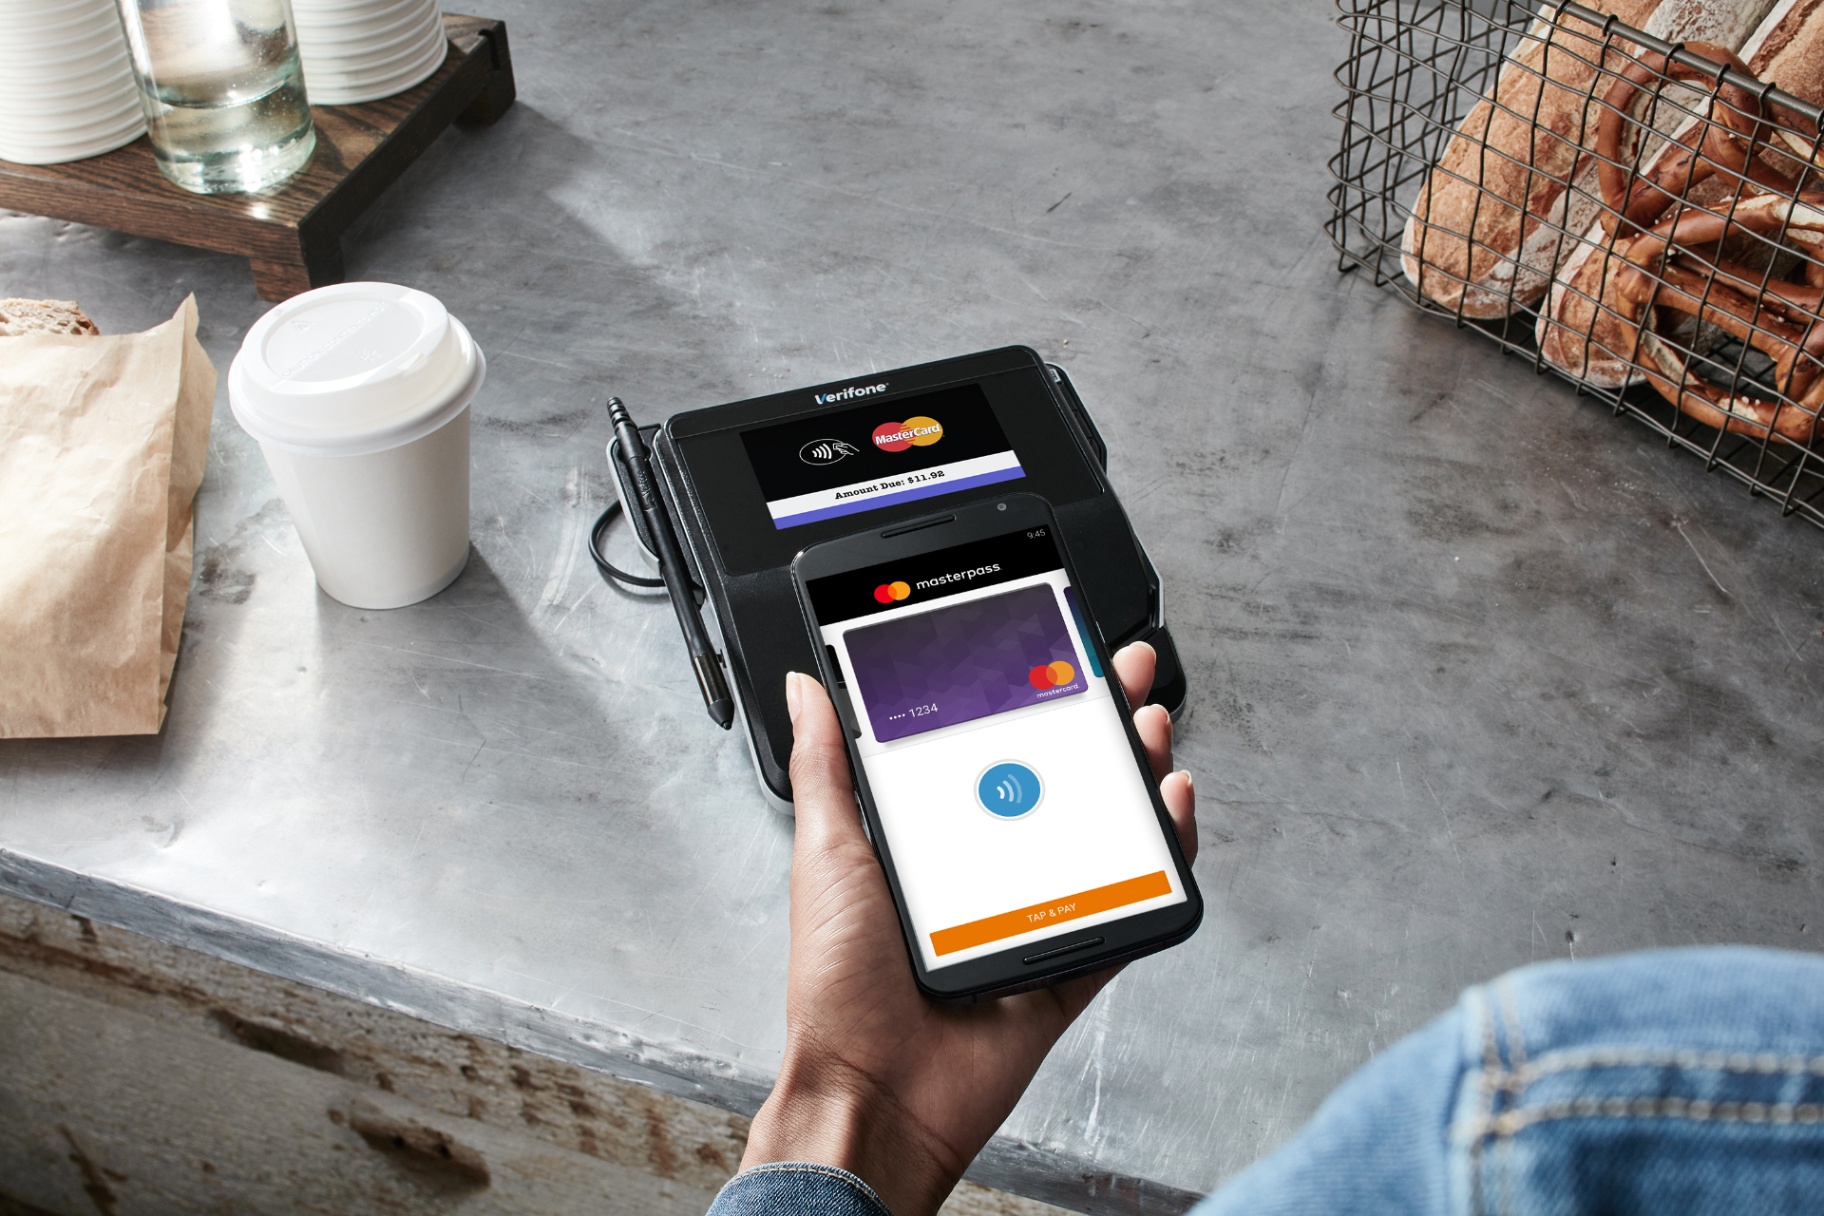 Contactless Card Payment - Learn More About this Technology